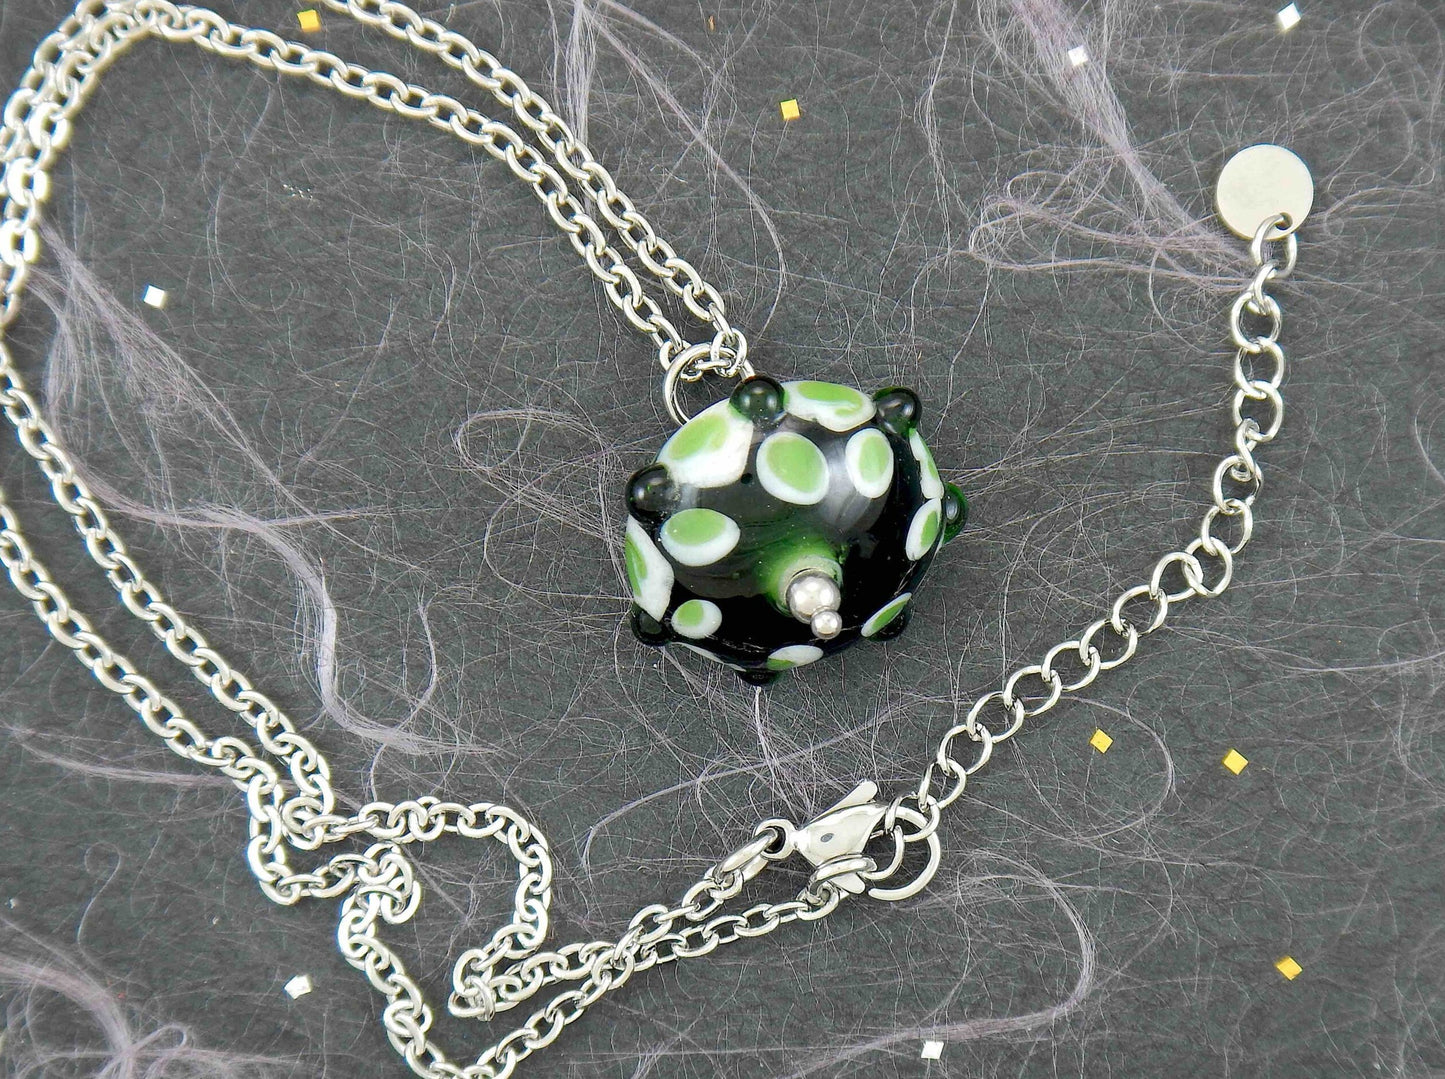 14-inch necklace with black saucer-shaped Murano glass bead, 3-dimensional green and white dots, stainless steel chain